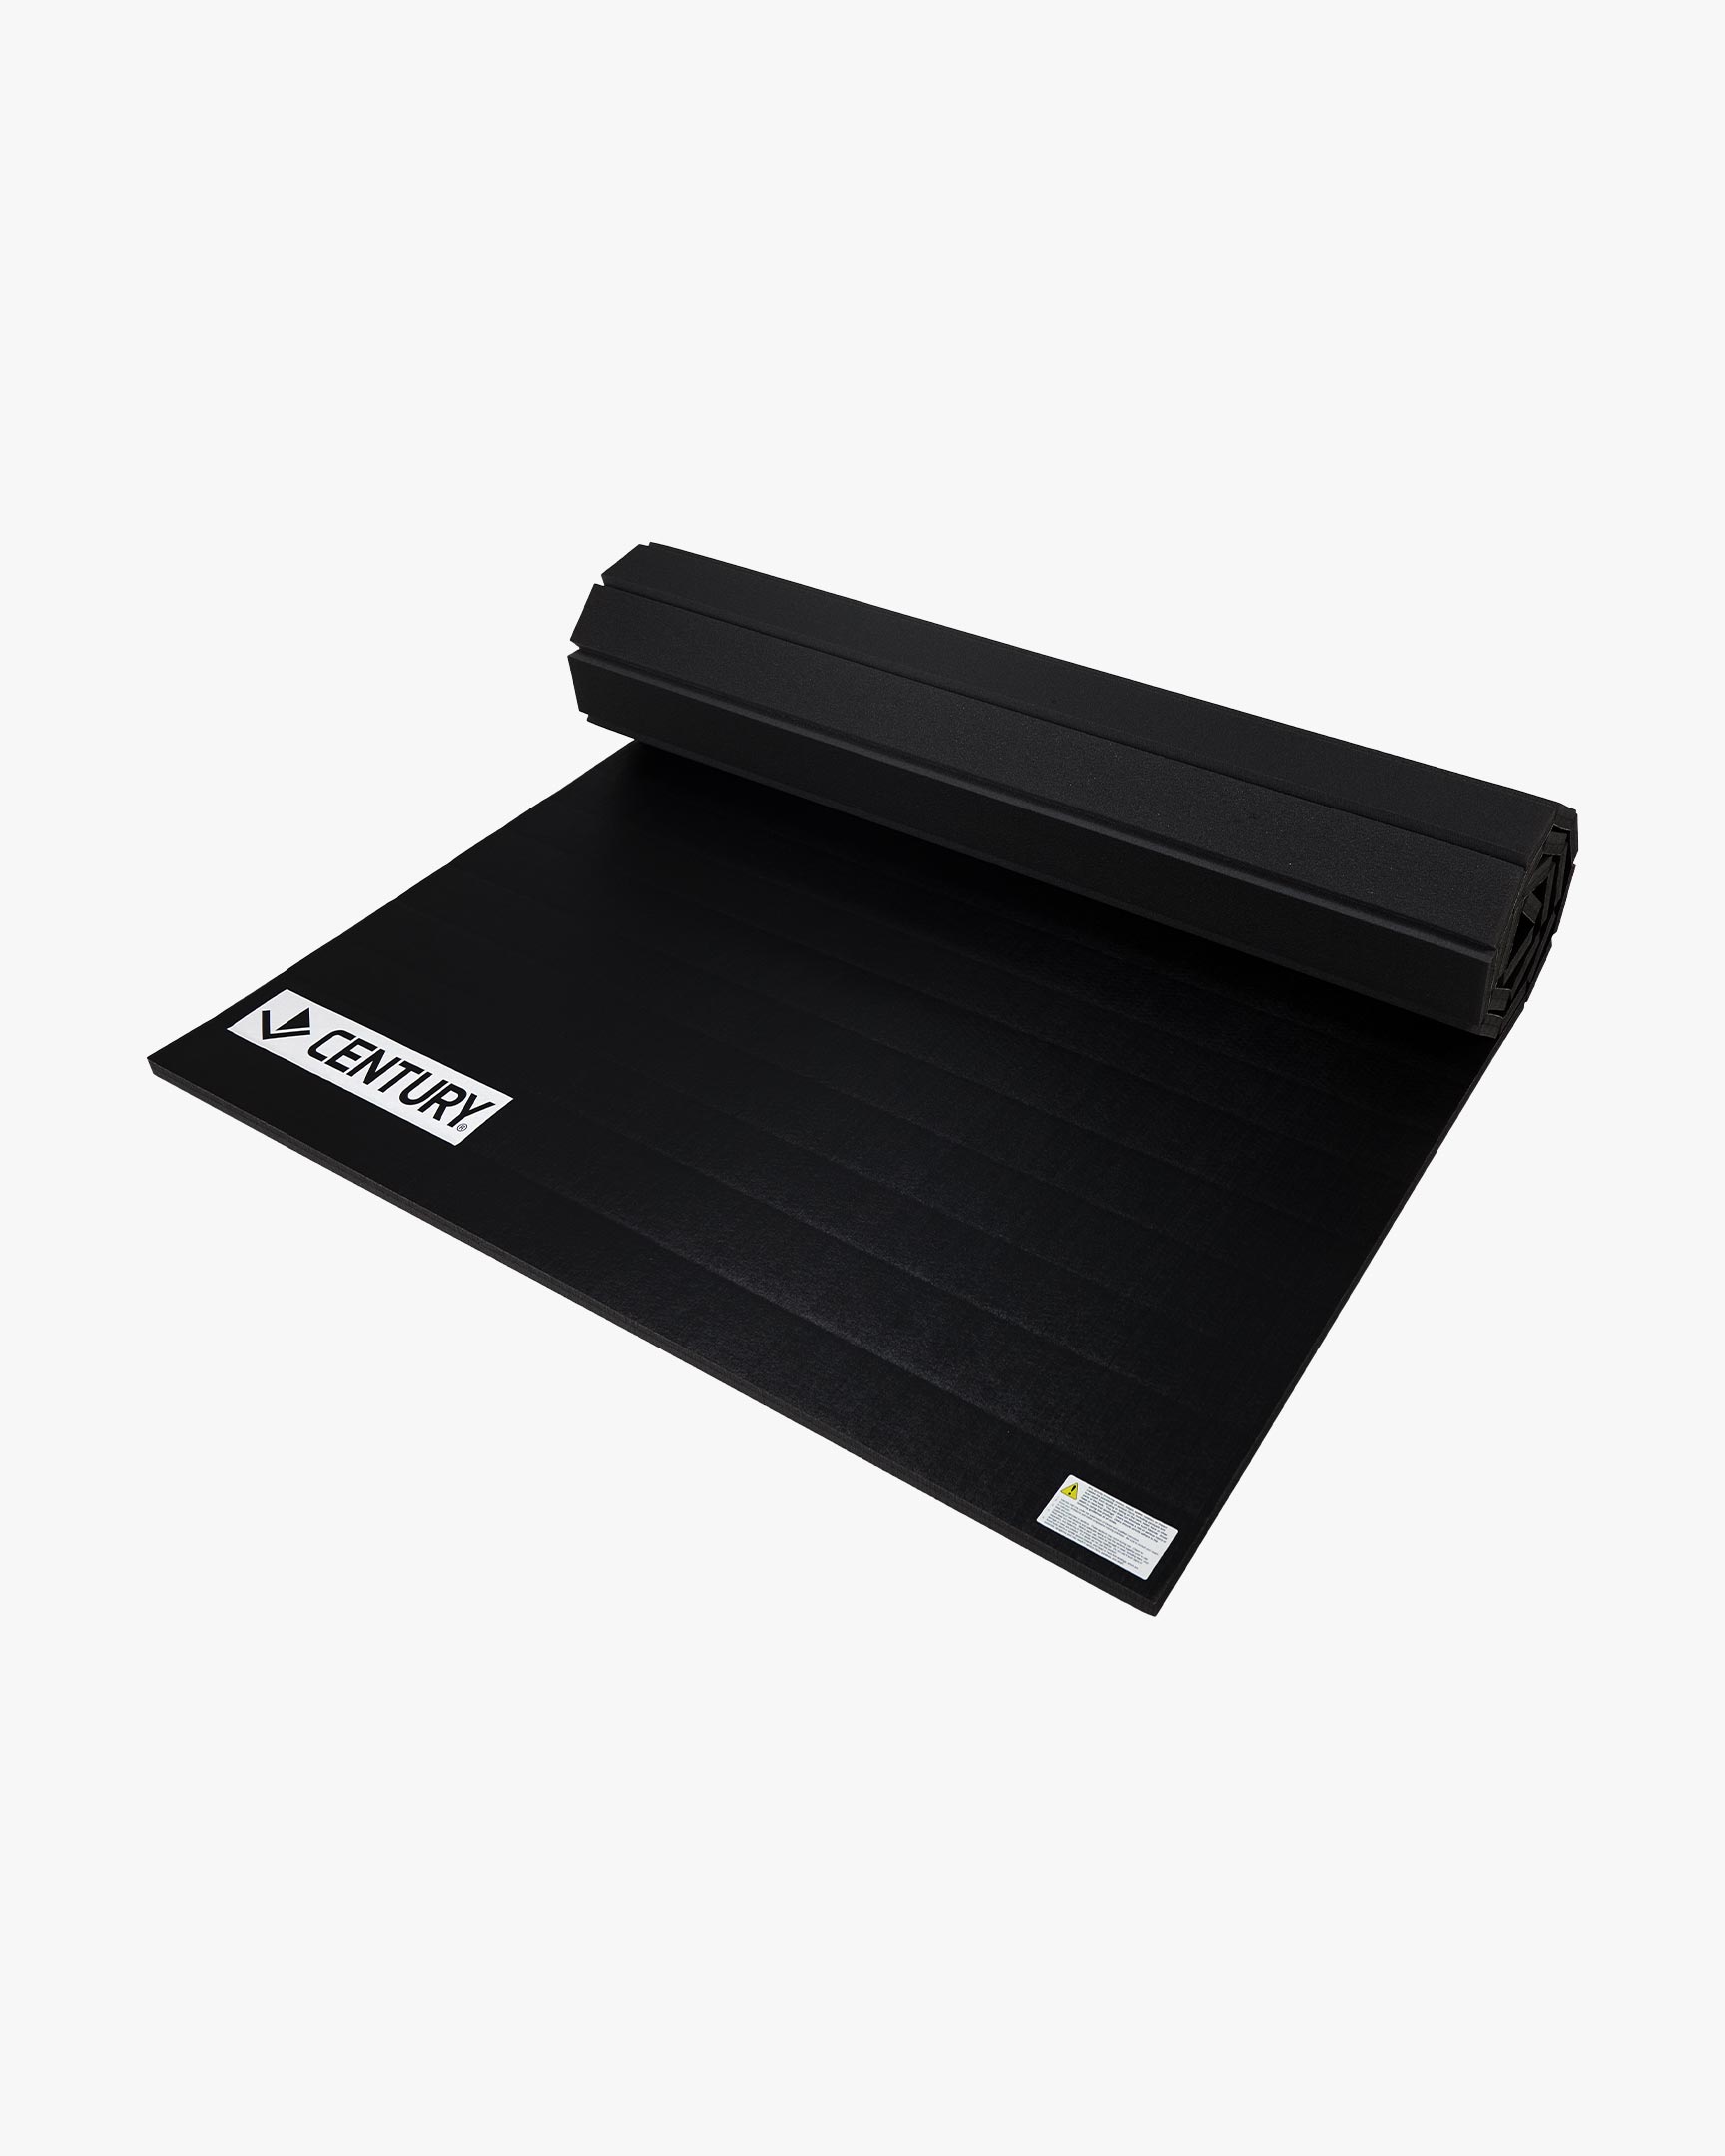 Home Rollout Mat - 5ft x 10ft x 1.25in Black